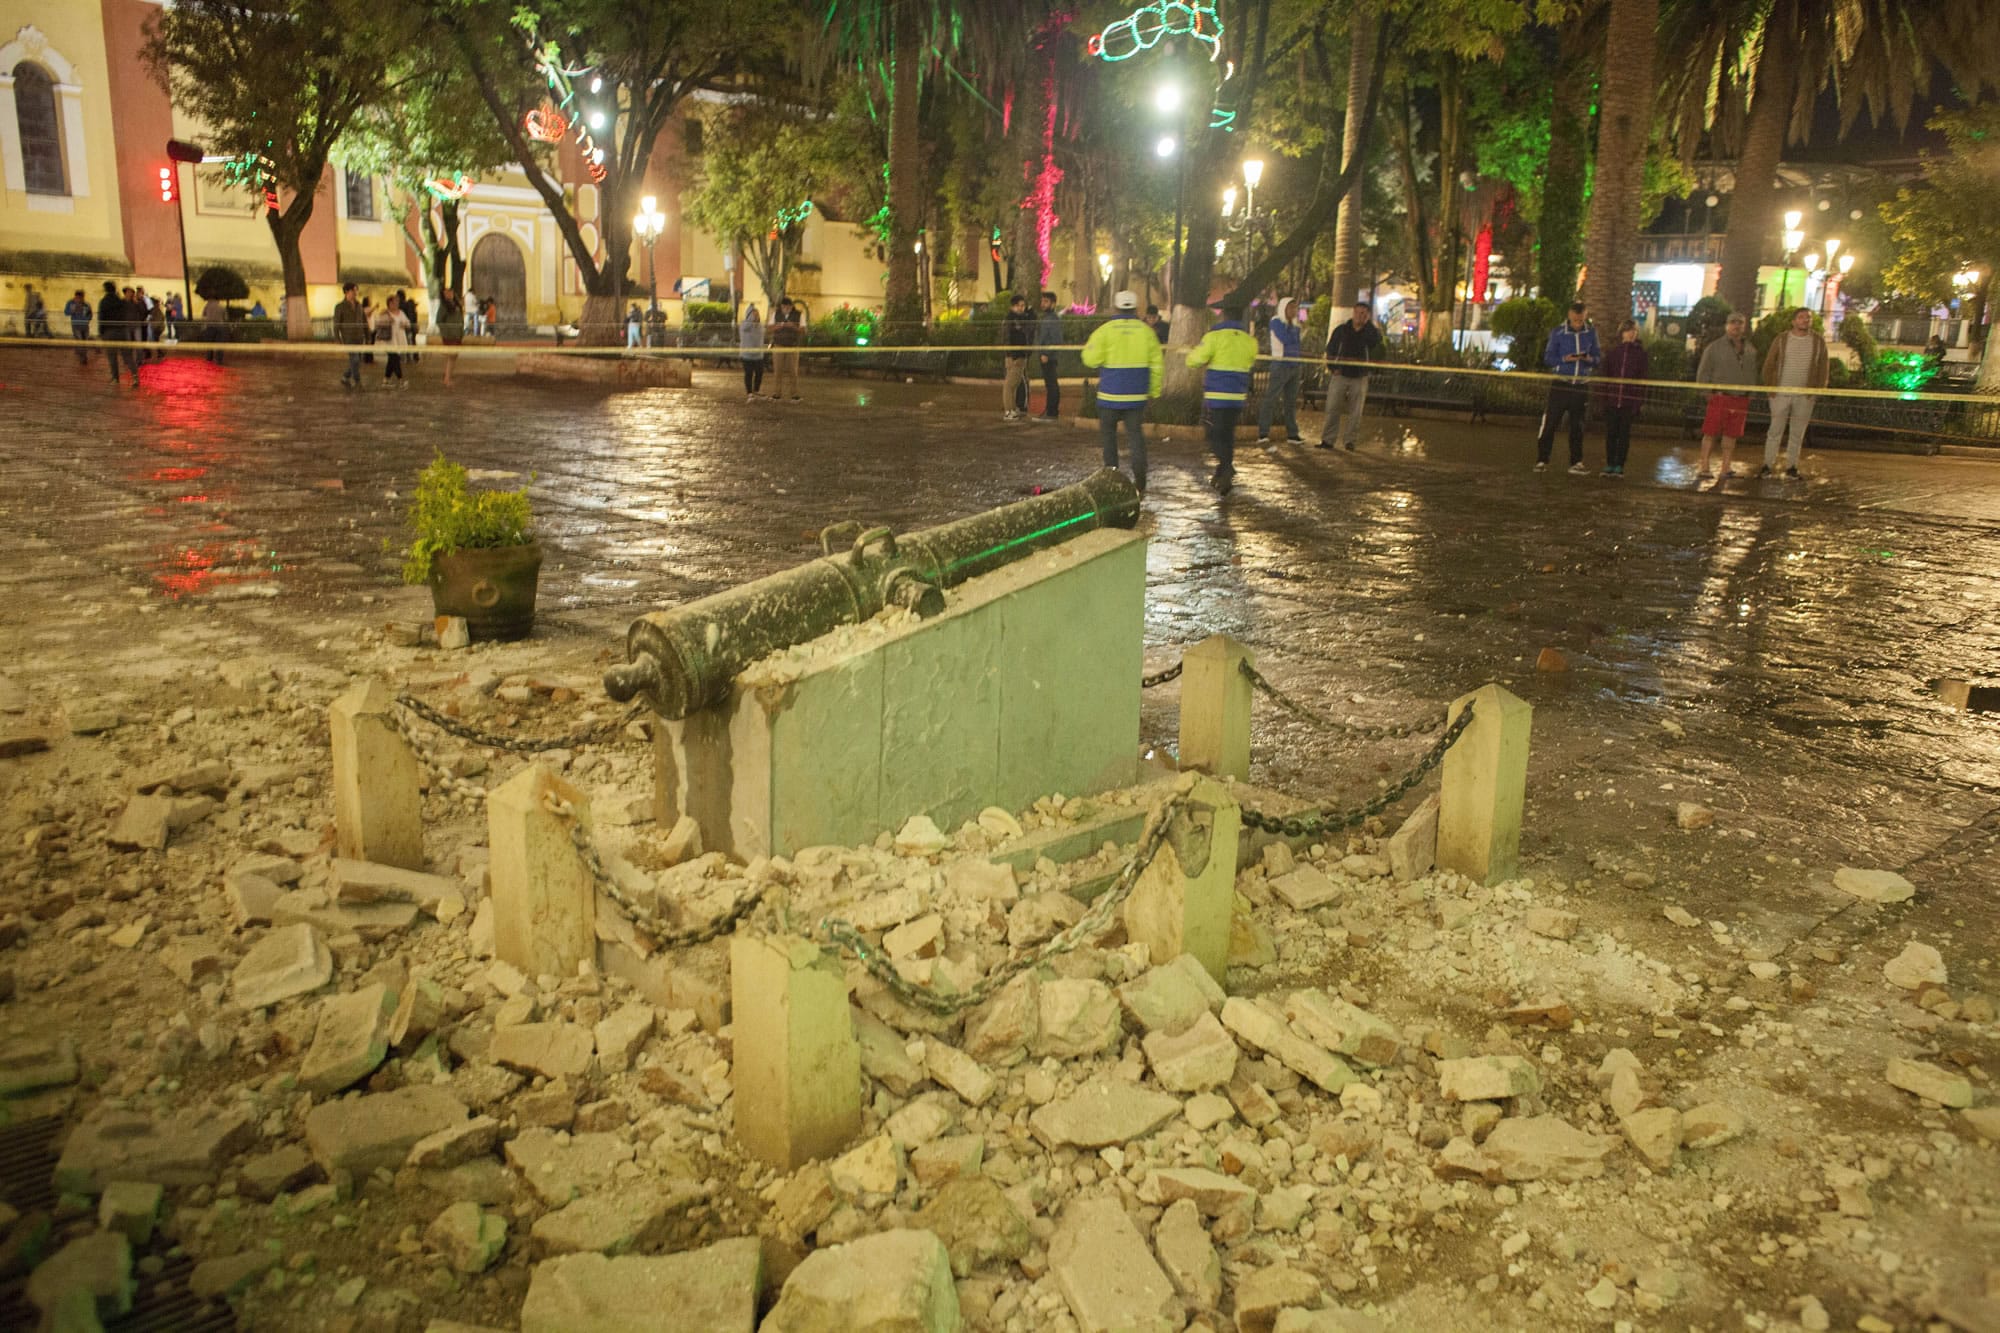 A monument surrounded by debris is cordoned off in the aftermath of an 8.1-magnitude earthquake in San Cristobal de Las Casas, state of Chiapas, Mexico, early Friday, Sept. 8, 2017. One of the most powerful earthquakes ever to strike Mexico hit off its southern coast, killing at least 15 people, toppling houses and businesses and sending panicked people into the streets.